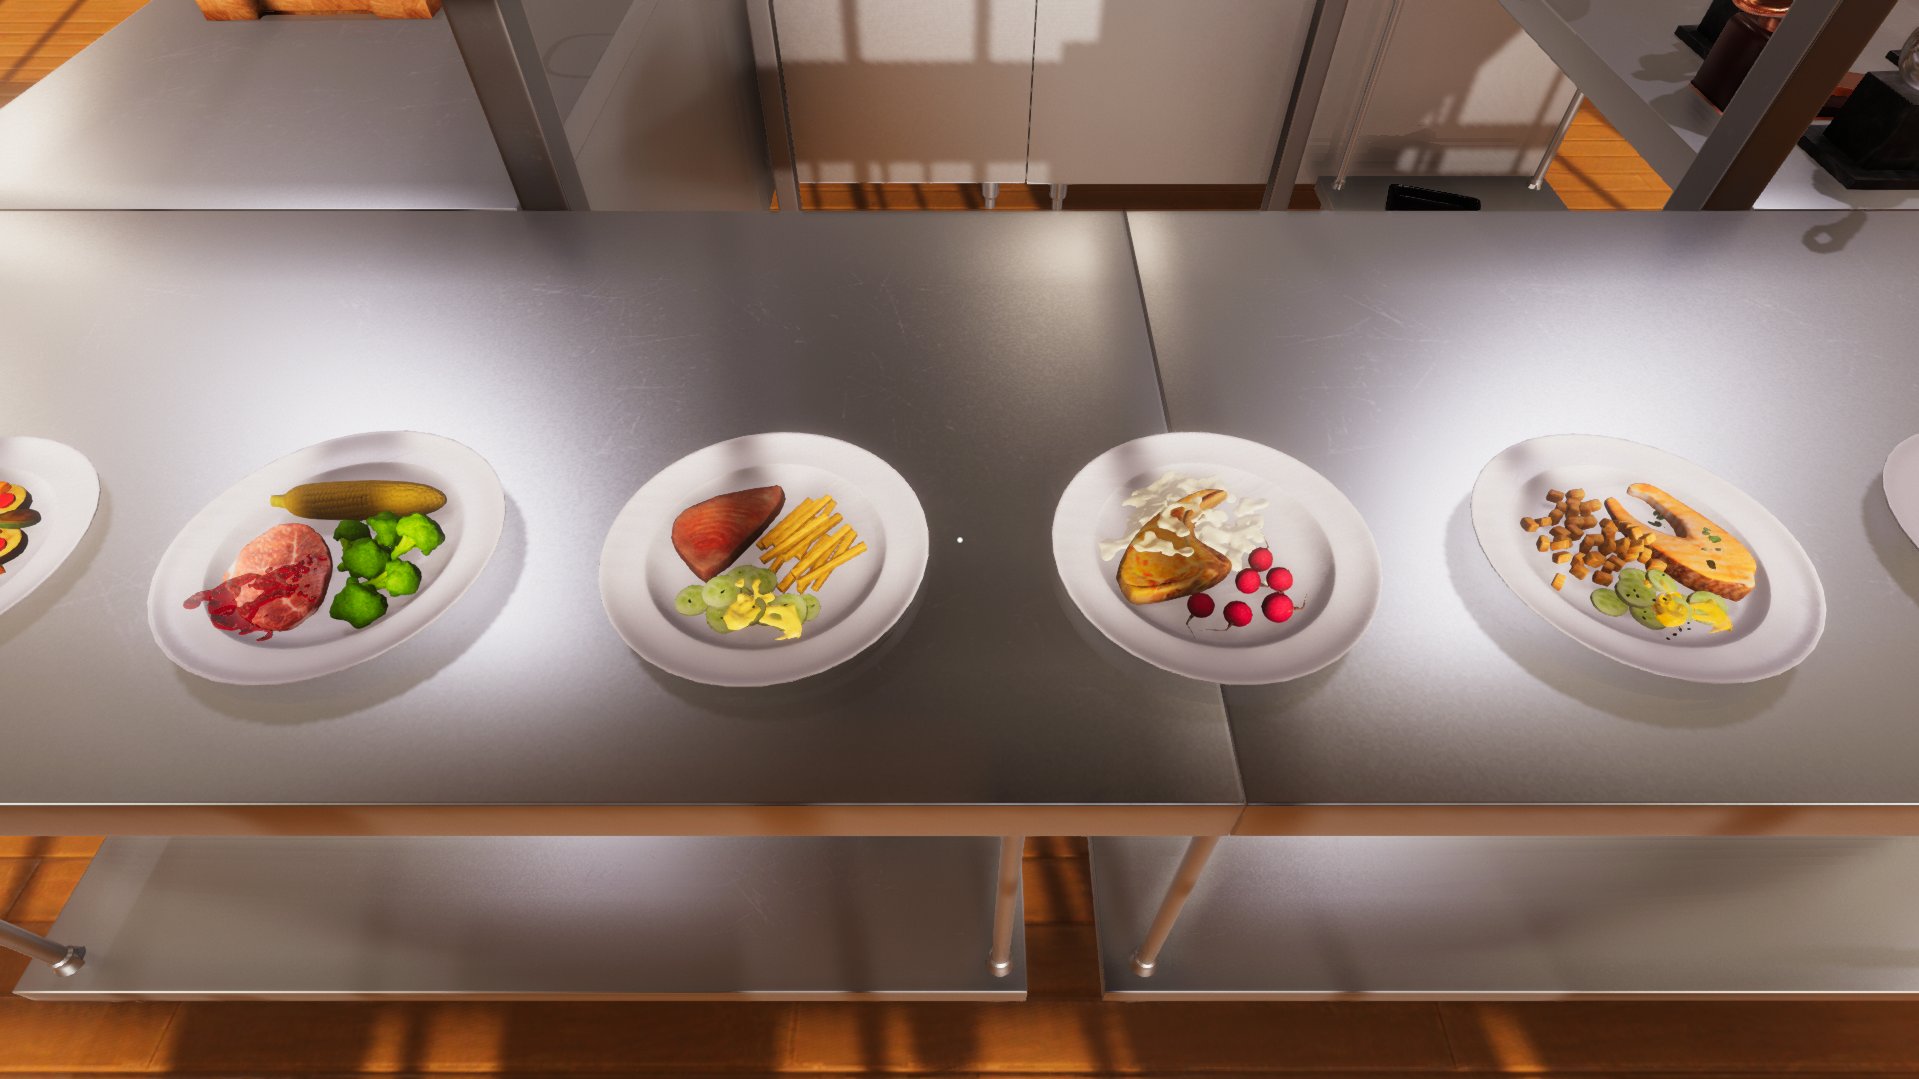 Cooking Simulator Is the Perfect Simulator Game